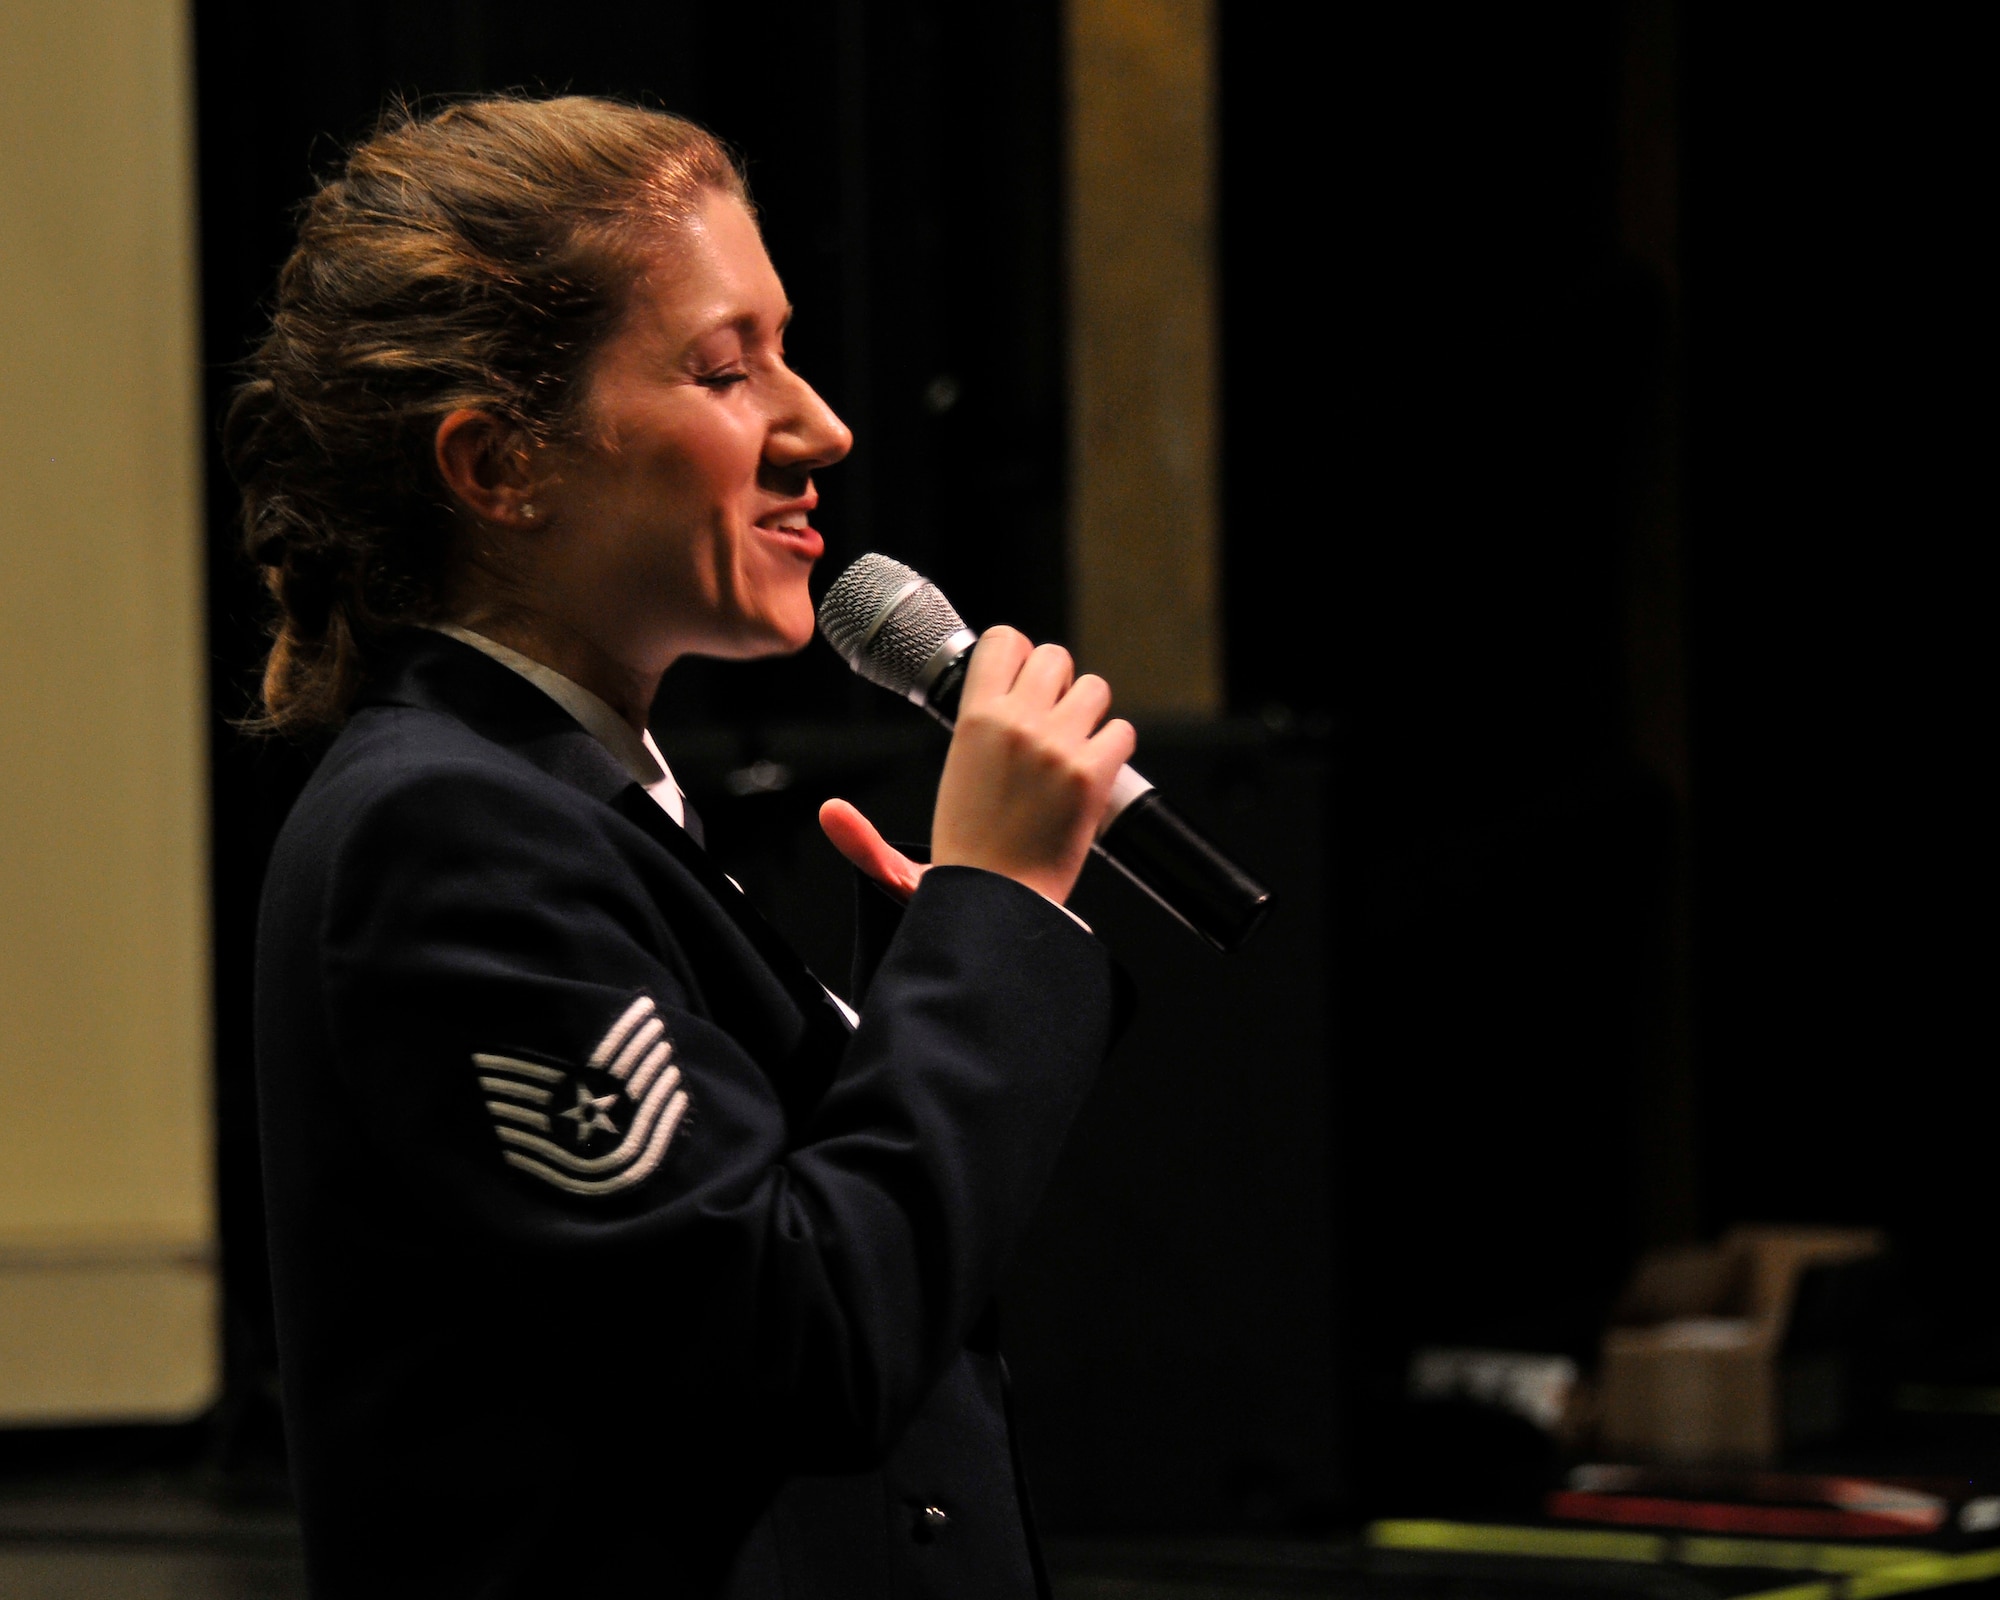 U.S. Air Force Tech. Sgt. Carrie L. Gatz, an instrumentalist with the 566th Air Force Band, sings "Shake It Off" at the Illinois Music Educators Association conference opening night in Peoria, Ill., Jan. 28, 2015. The 566th AFB serves in war and peace by preserving national heritage through the power of music at military, recruiting and community relations events. (U.S. Air National Guard photo by Staff Sgt. Lealan Buehrer)